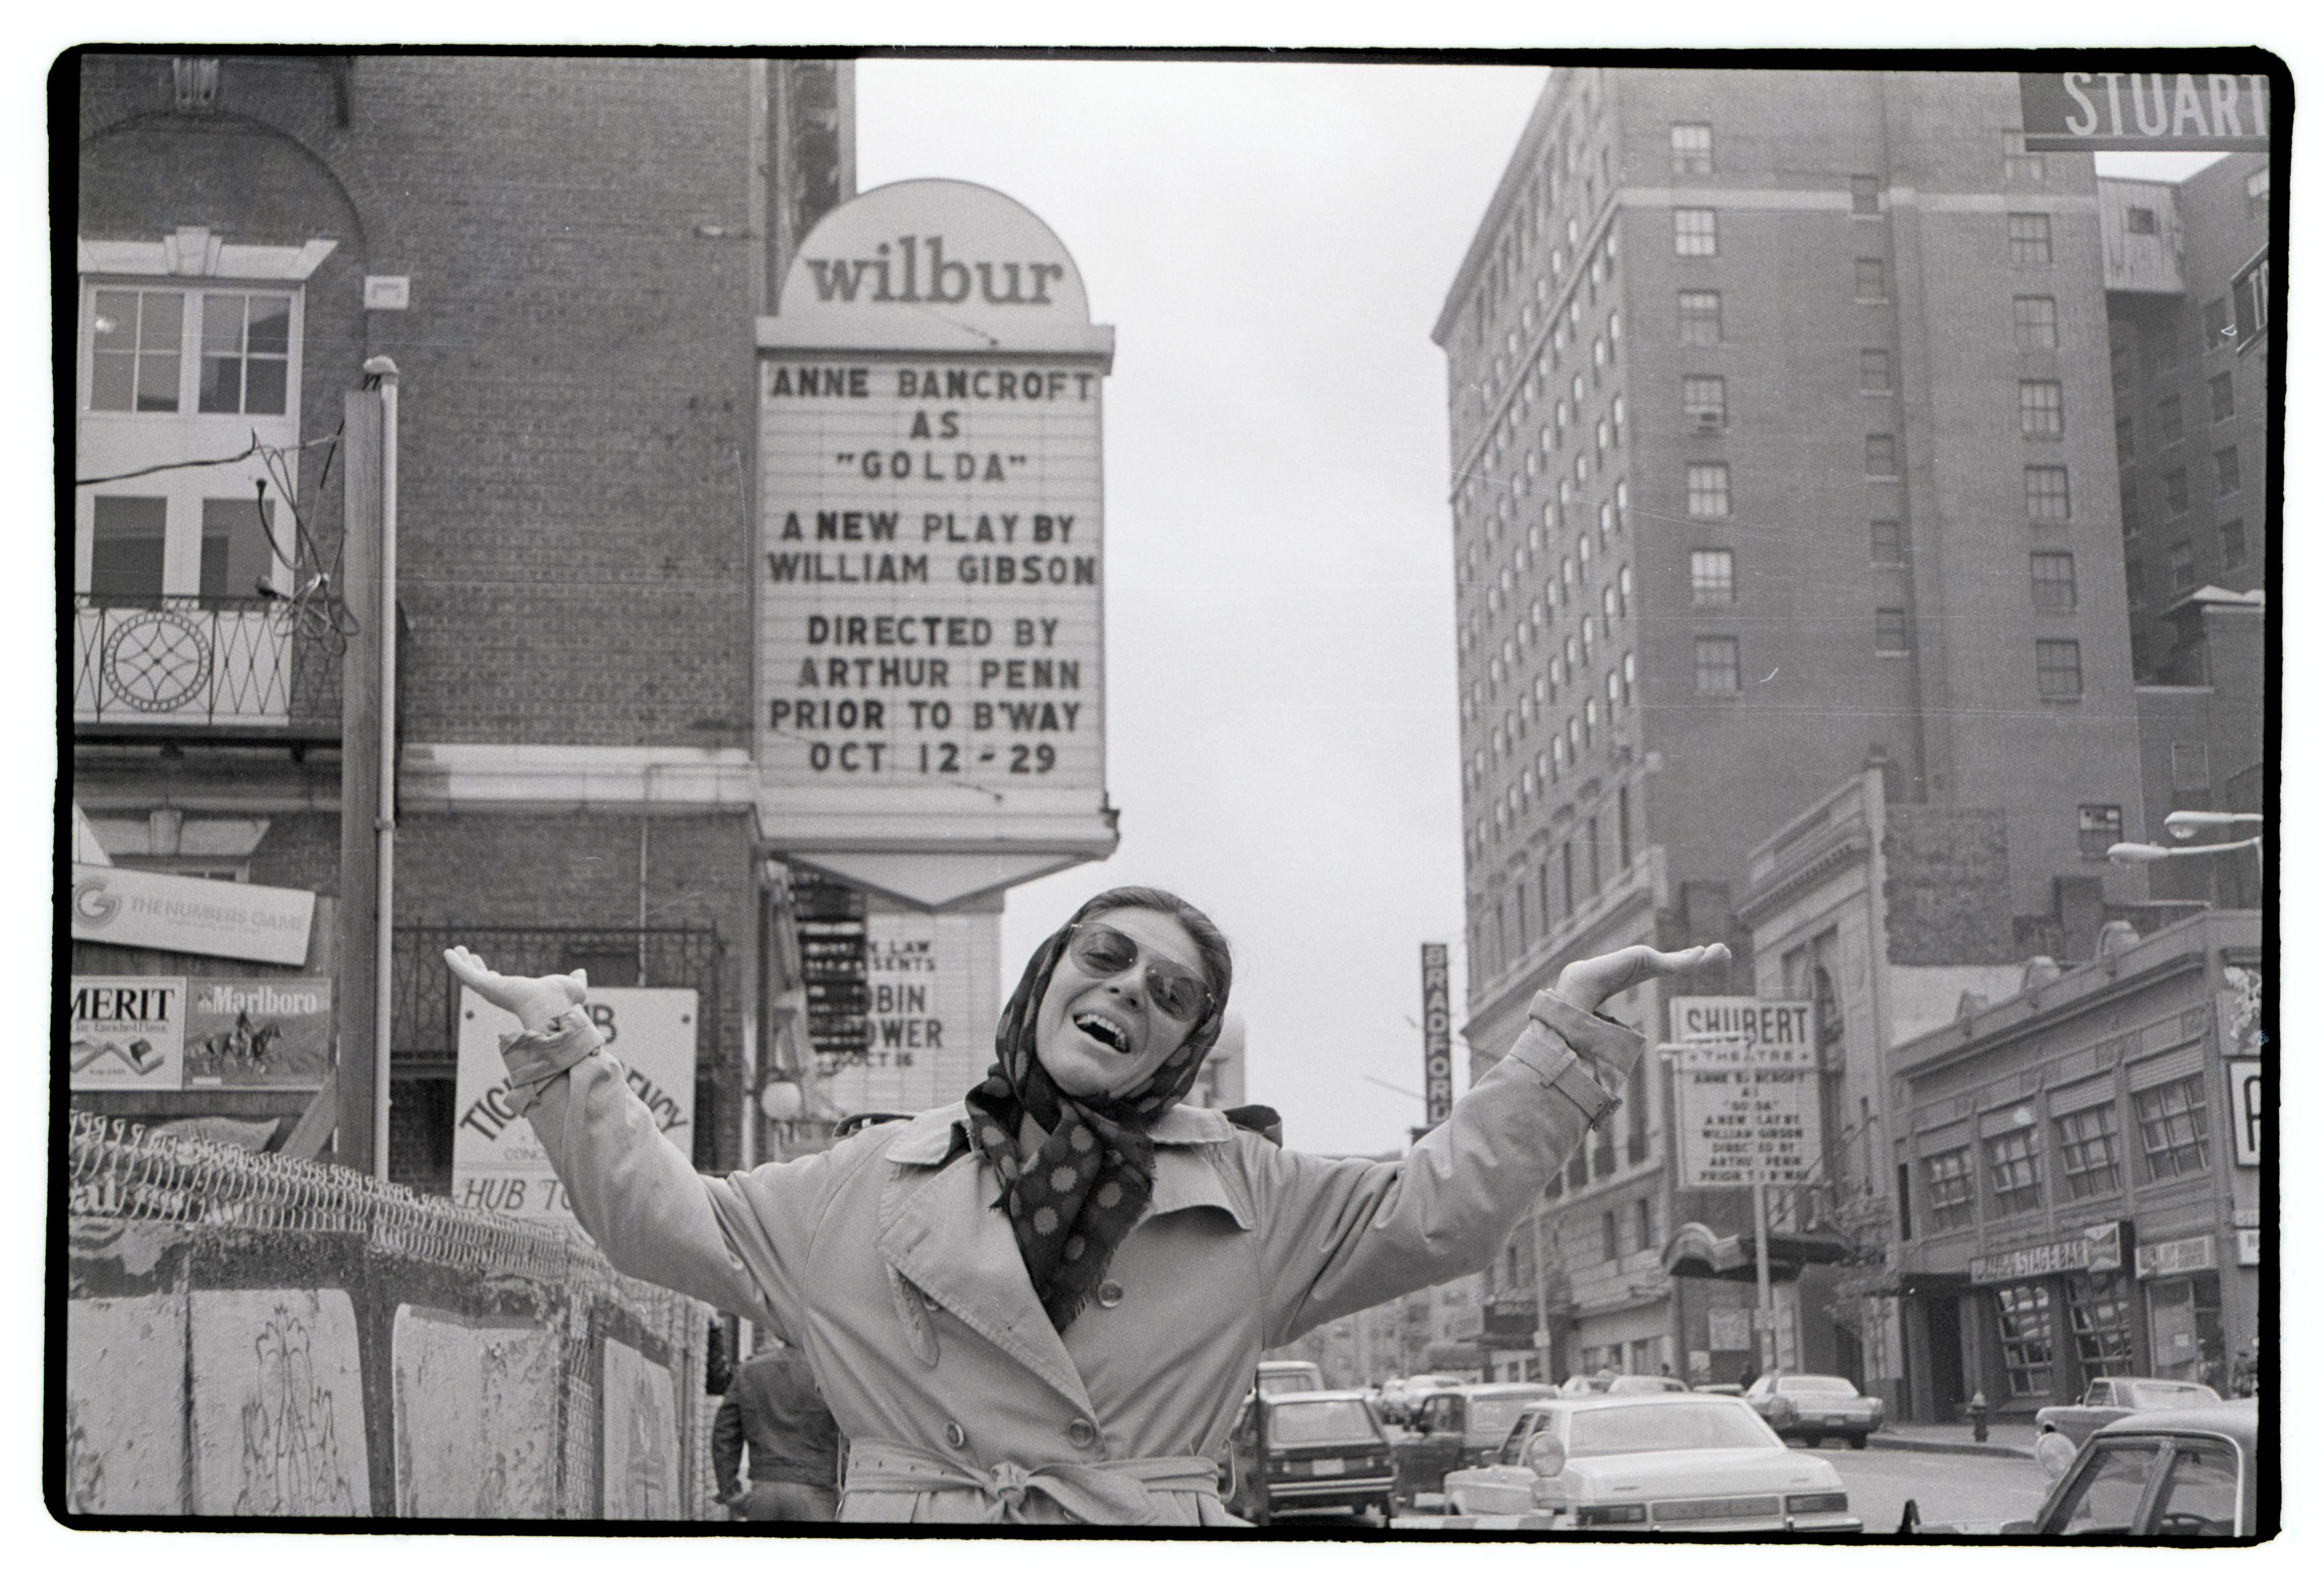 Anne Bancroft with her name on two theatre marquees. She was meant to star in the new play "Golda," was to appear in the show at the Wilbur Theatre. But, a fire at the theatre forced the show across the street, resulting in identical marquis. │Source: Getty Images  